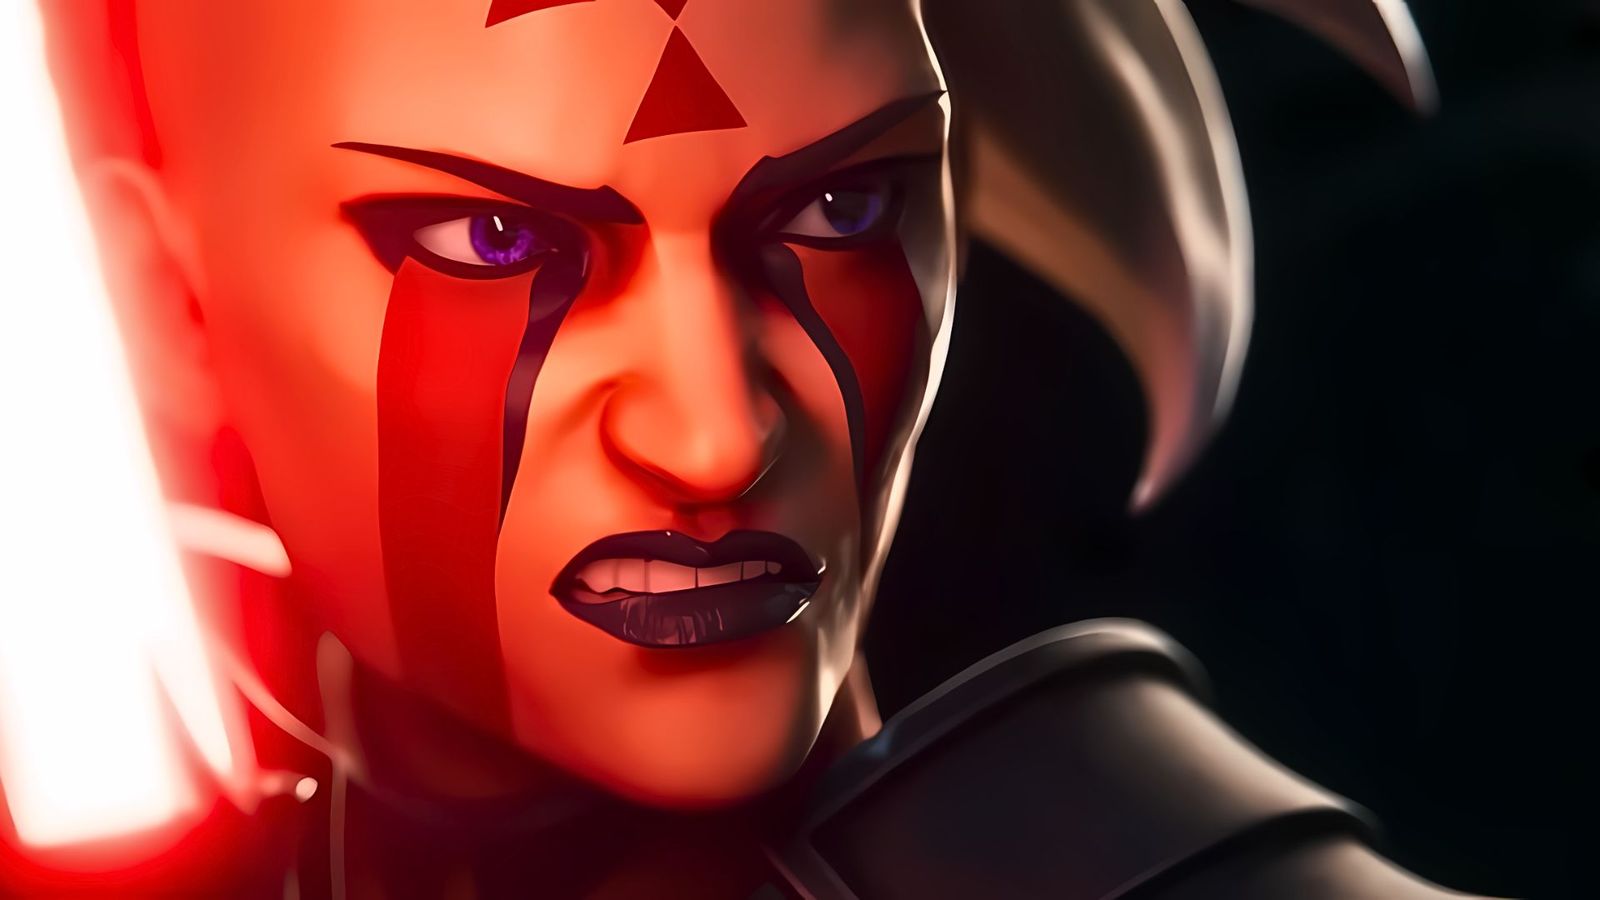 Image of Sith character Rieve staring down menacingly at her enemies.